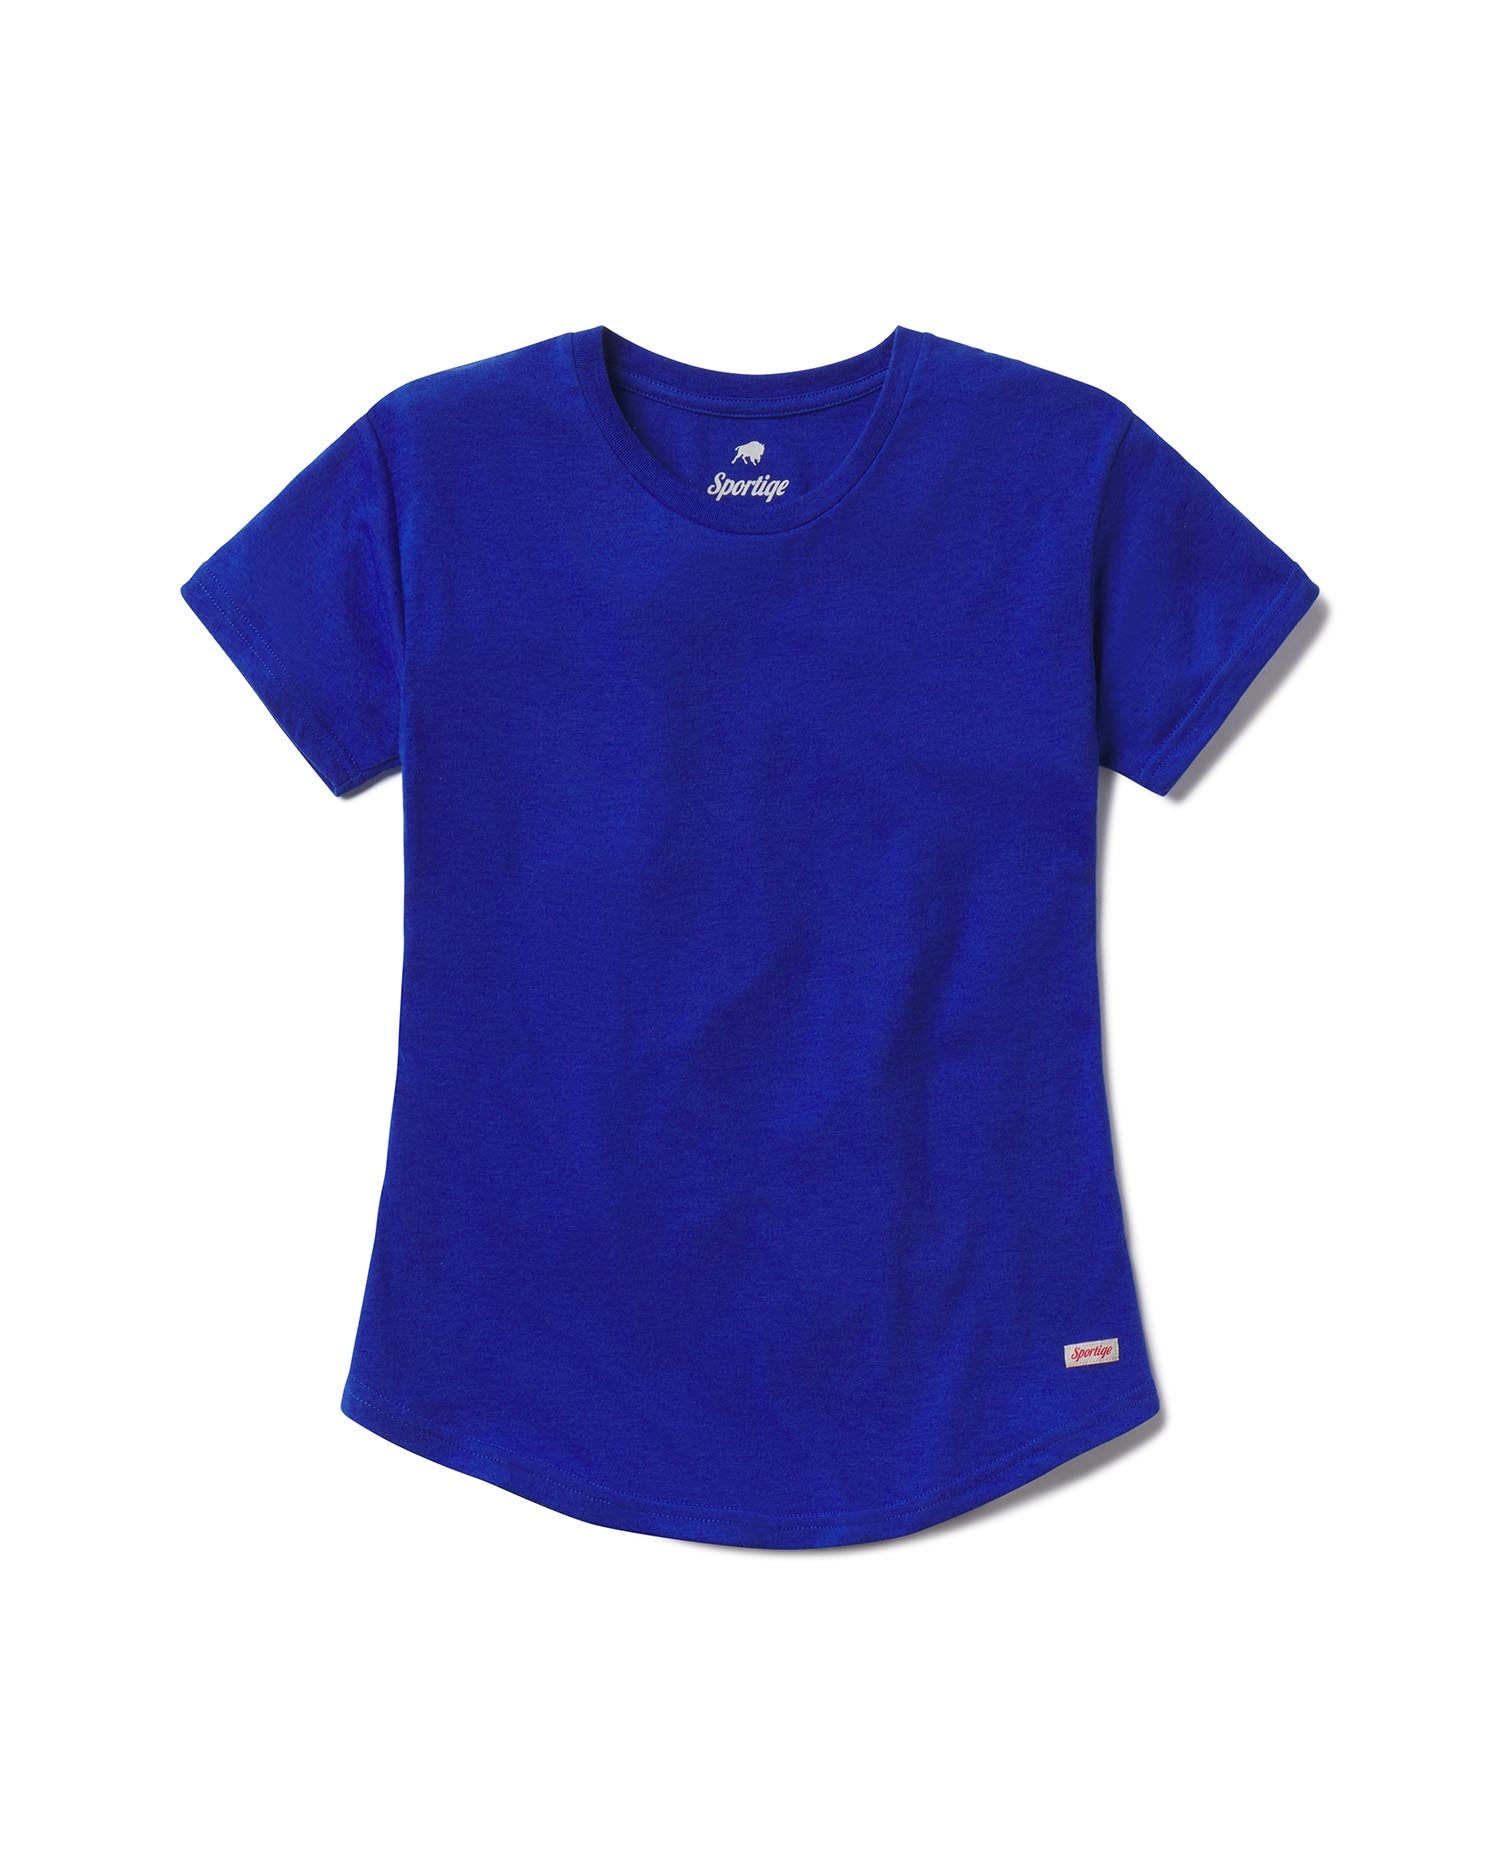 WOMEN'S PHOEBE TRIBLEND TEE (Zenith Collection) - Sportiqe Apparel 